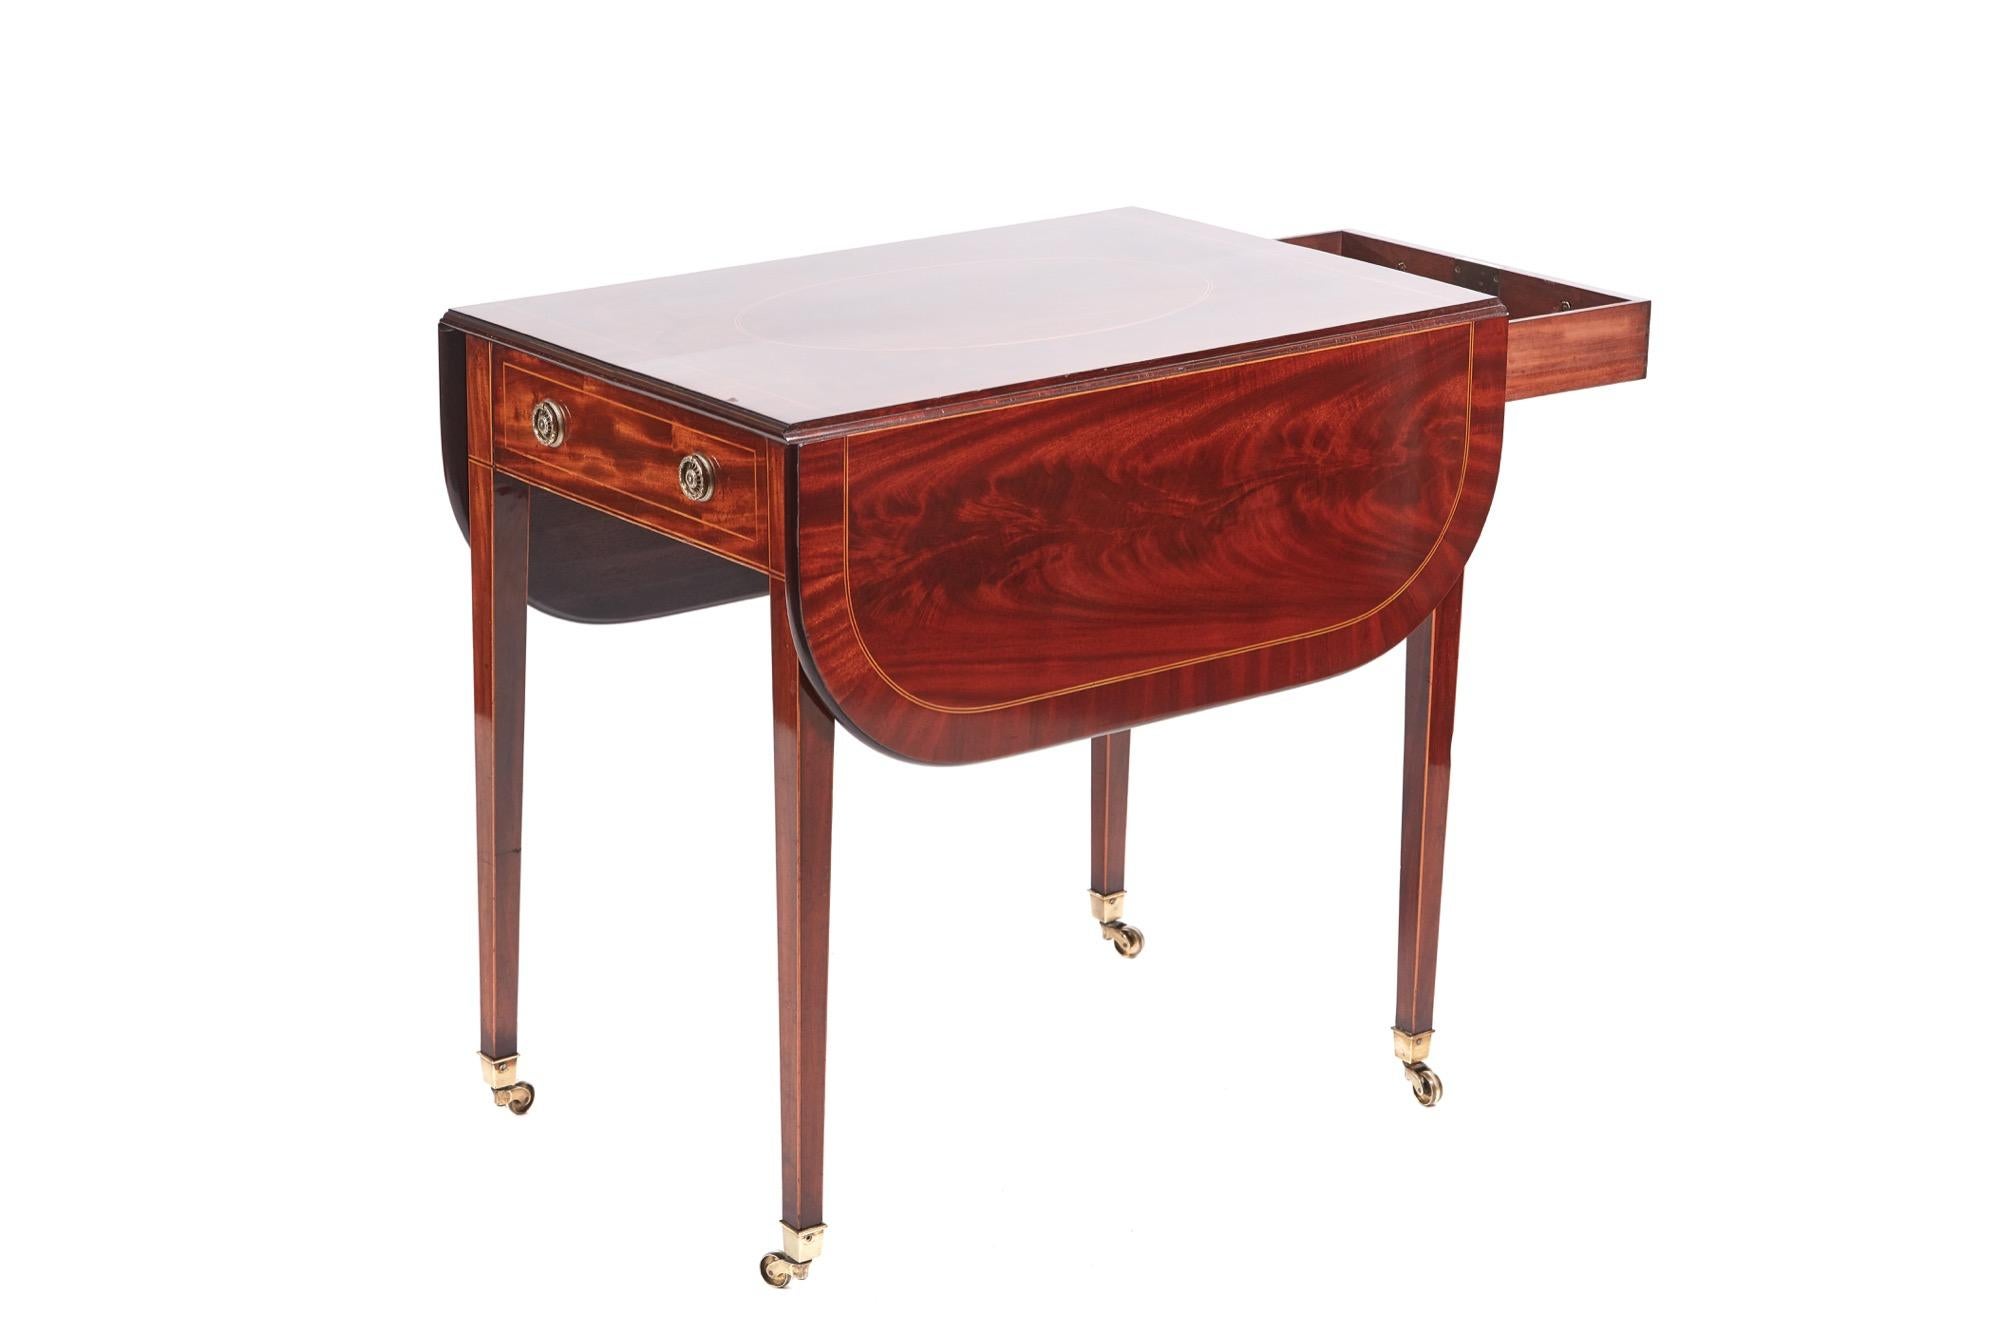 Fine quality Sheraton antique period inlaid mahogany Pembroke table with an outstanding quality inlaid top with two drop leaves, one-drawer and one dummy drawer to the frieze with original brass handles. It stands on four square tapering inlaid legs